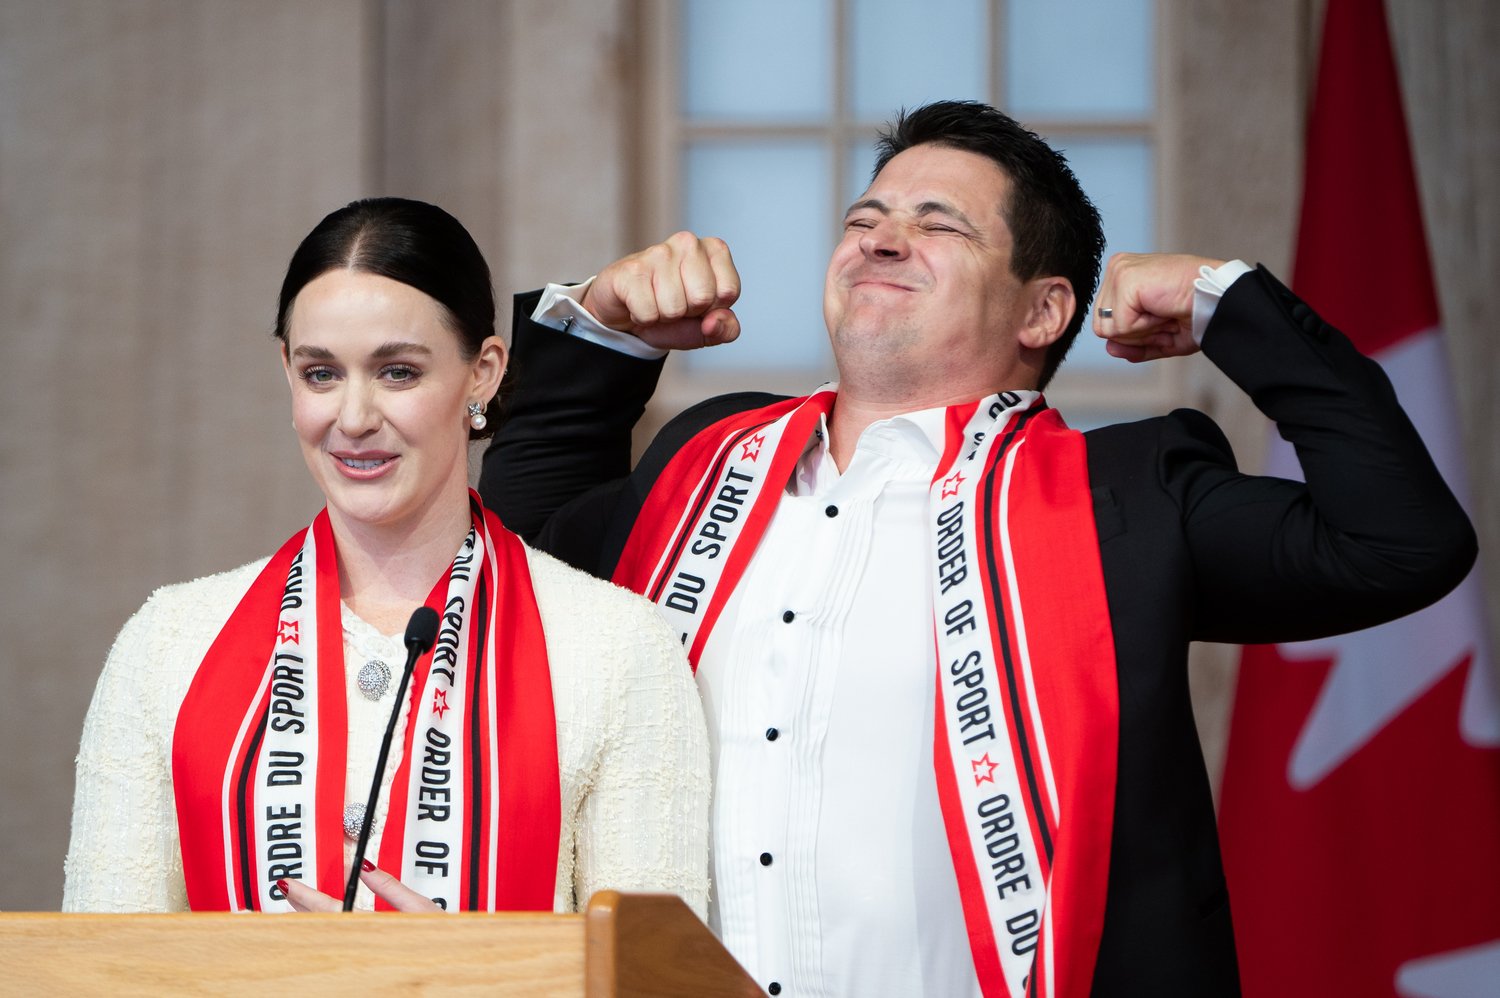  Canadian figure skater Scott Moir, right, flexes his muscles as he jokes on stage alongside partner Tessa Virtue, as they deliver remarks after receiving the Order of Sport during the Class of 2023 induction ceremony in Gatineau, Que., on Thursday, 